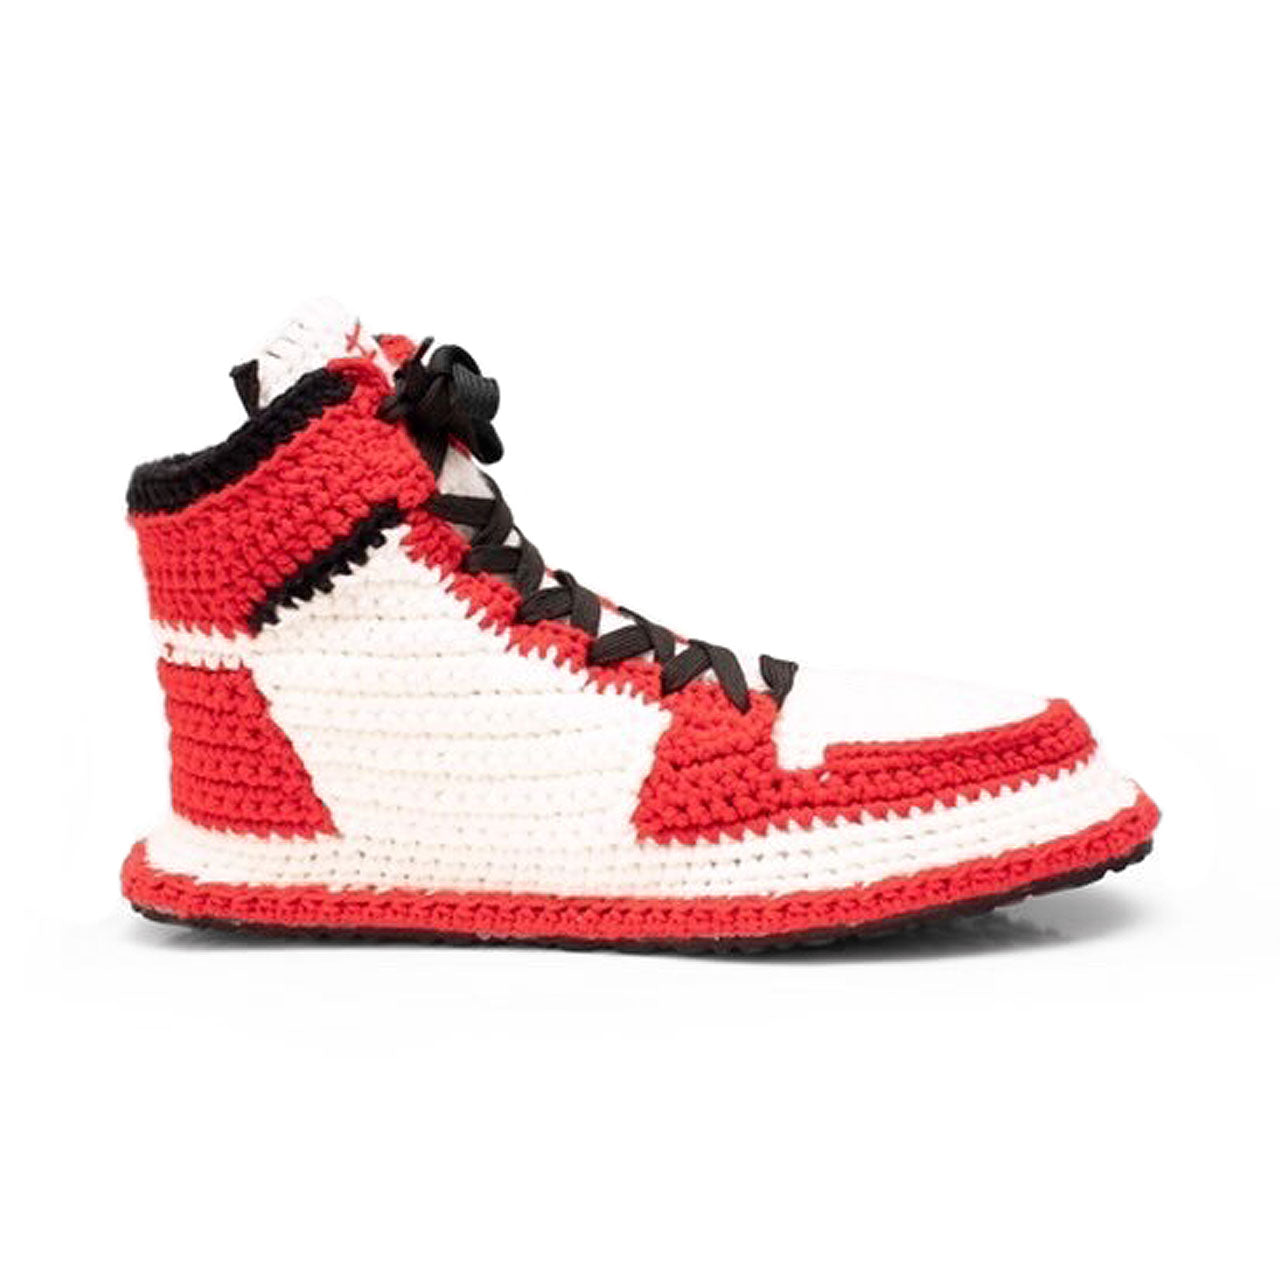 Fuggit Chicago 1 Knit House Shoes